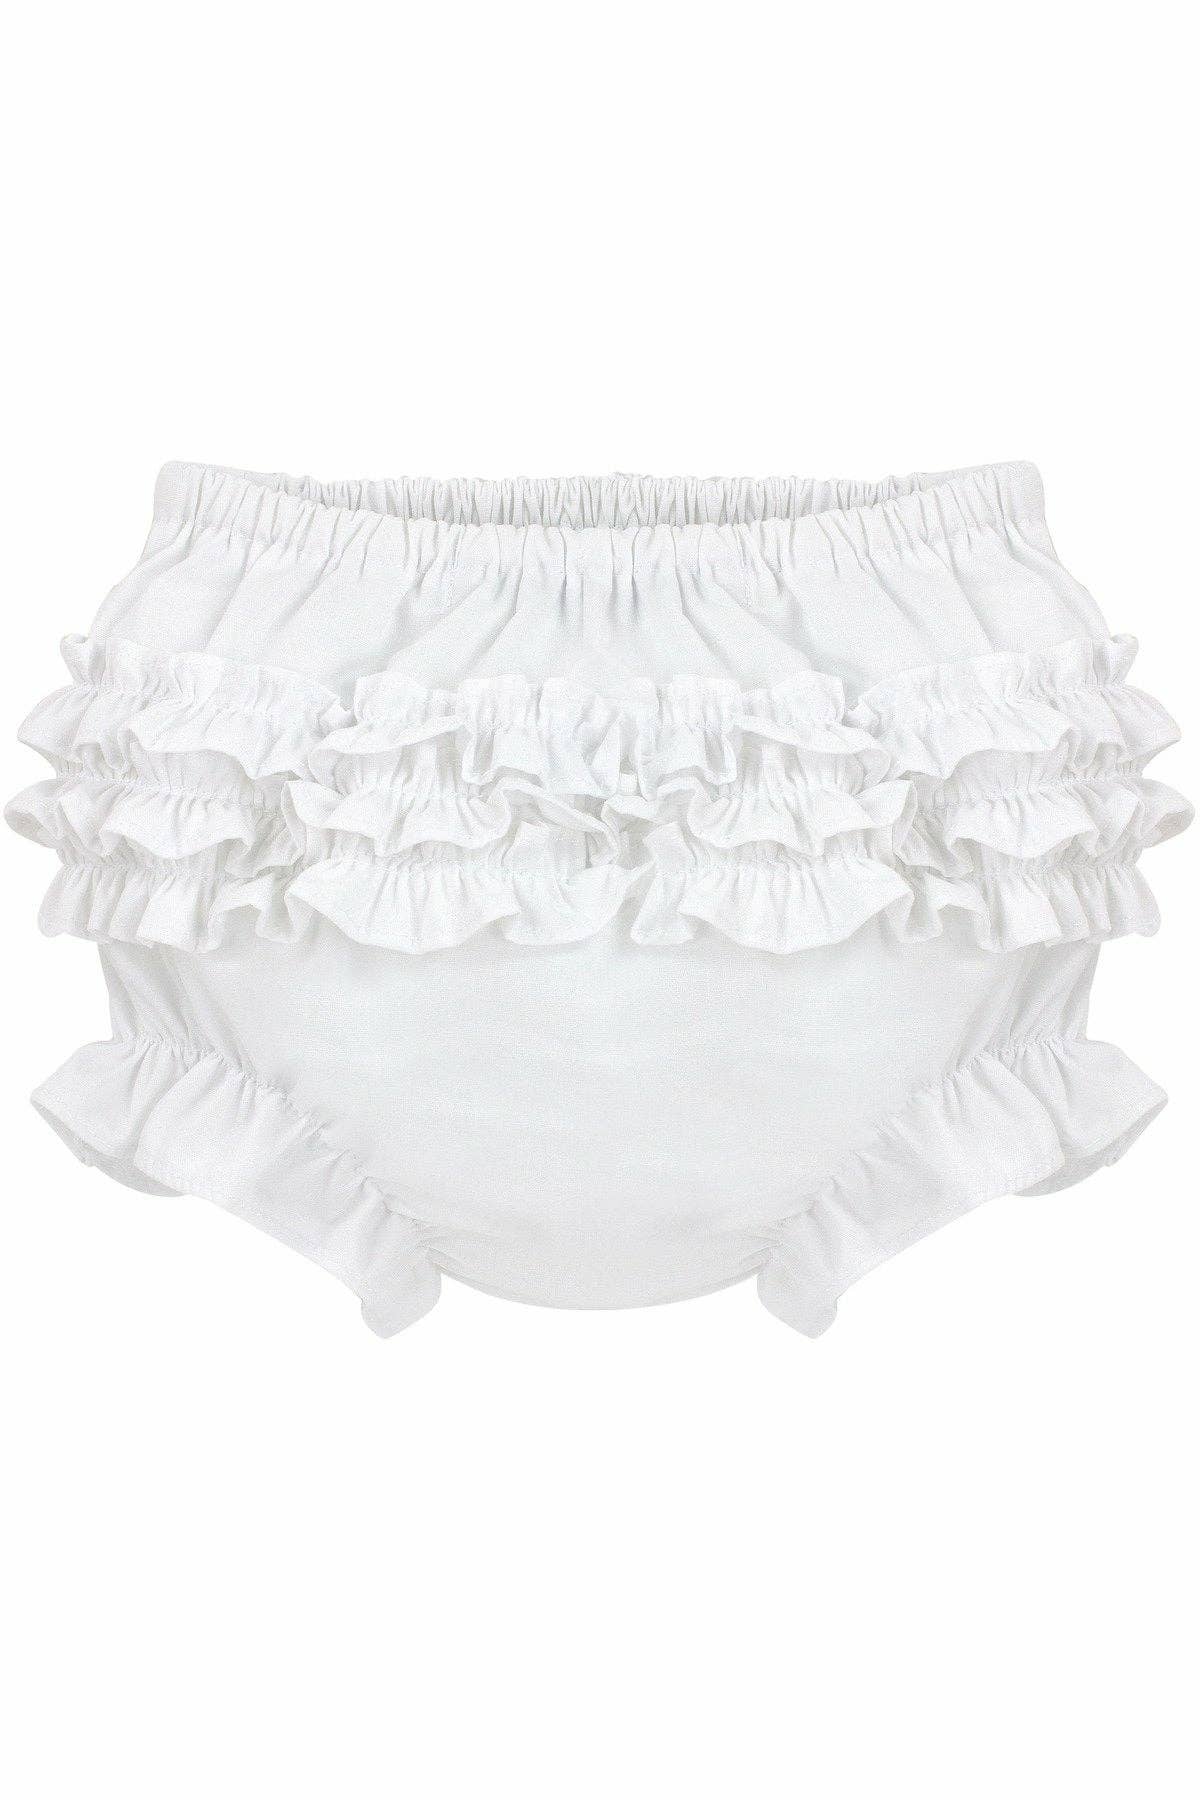 Carriage Boutique ruffle diaper cover